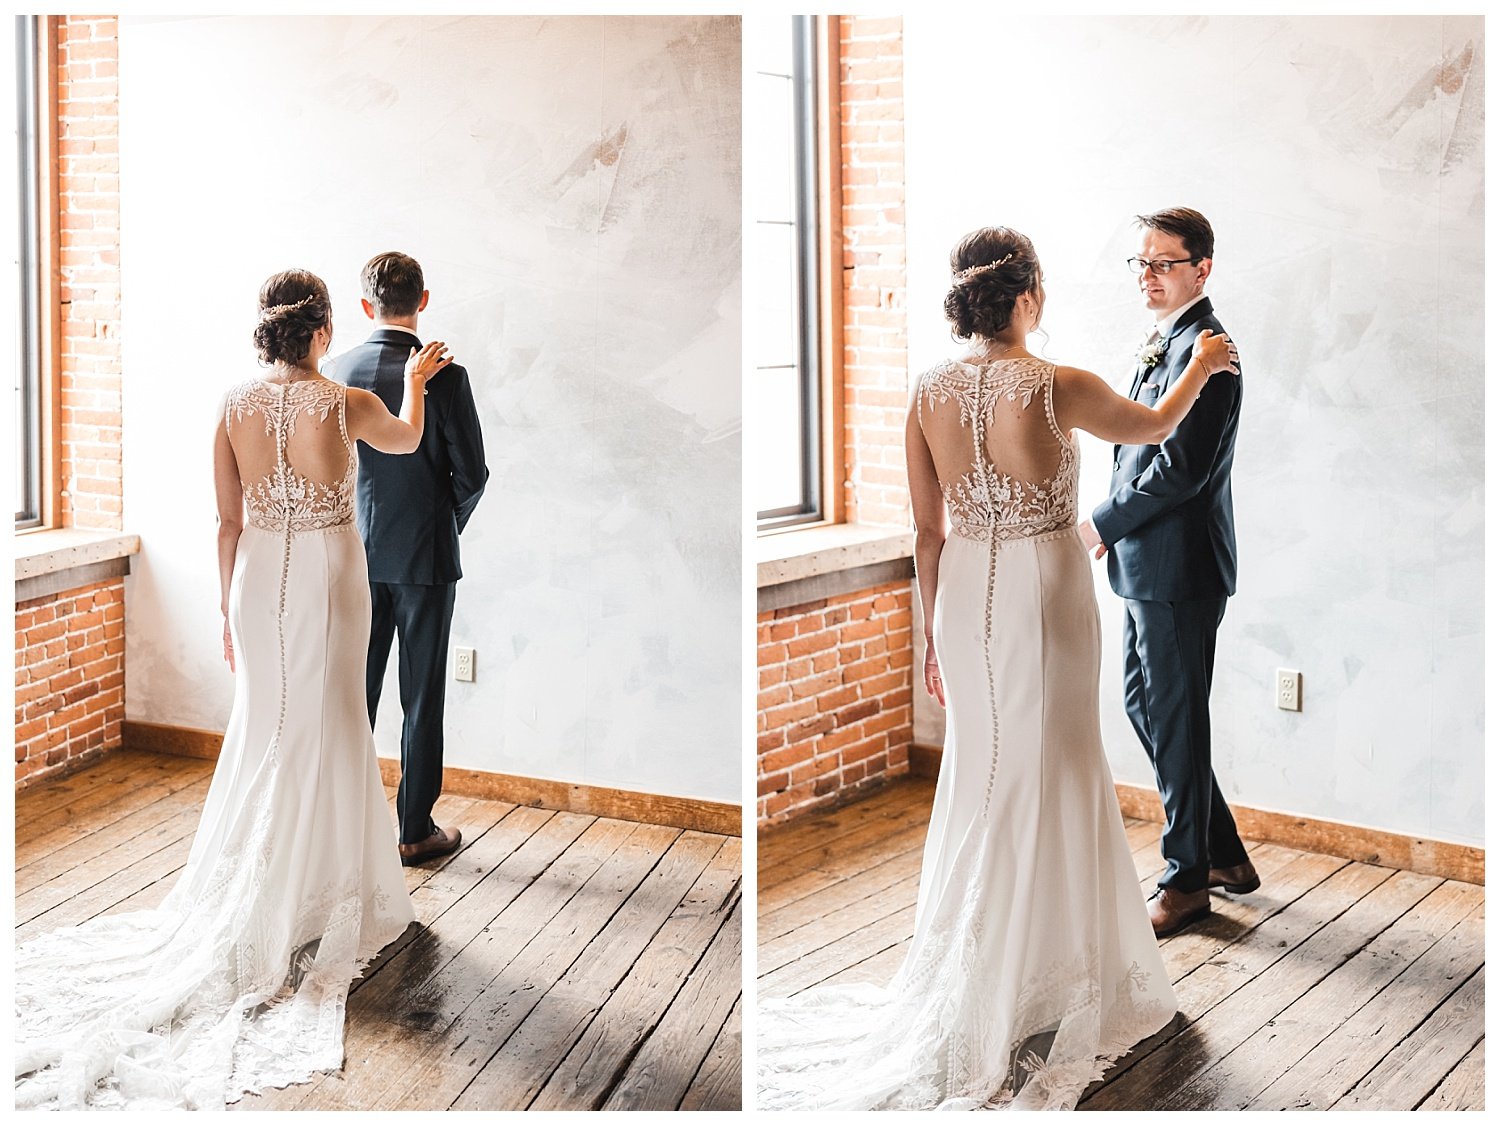 The Booking House wedding, Manheim PA, bride and groom first look